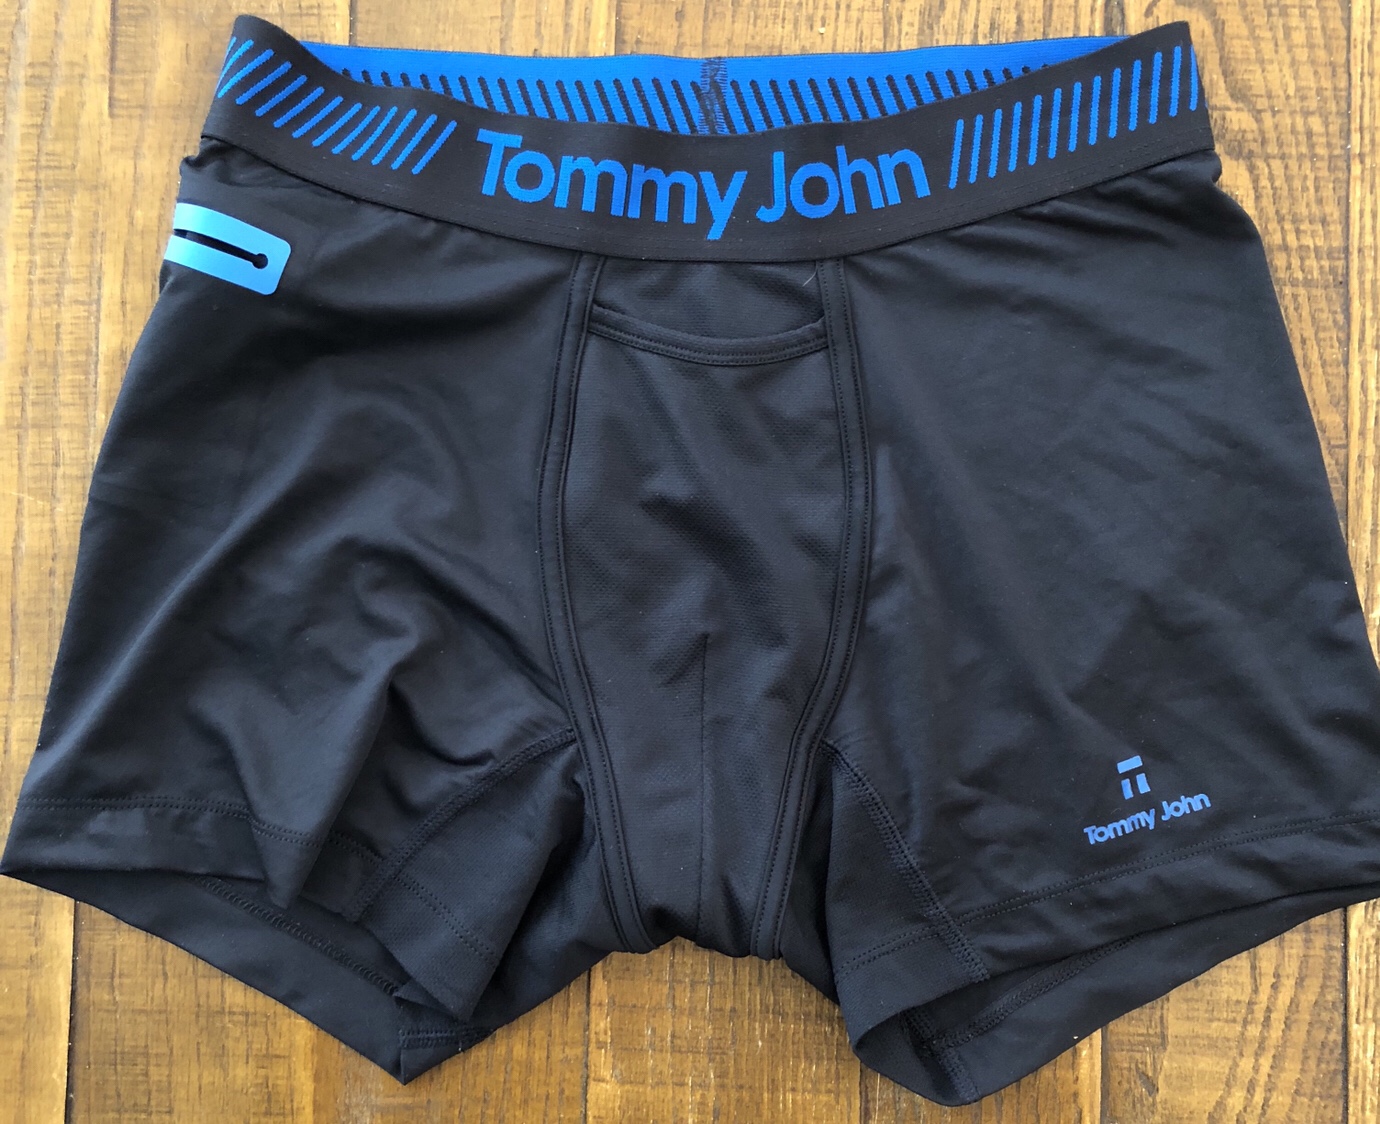 Tommy John Underwear Reviewing - Dr 